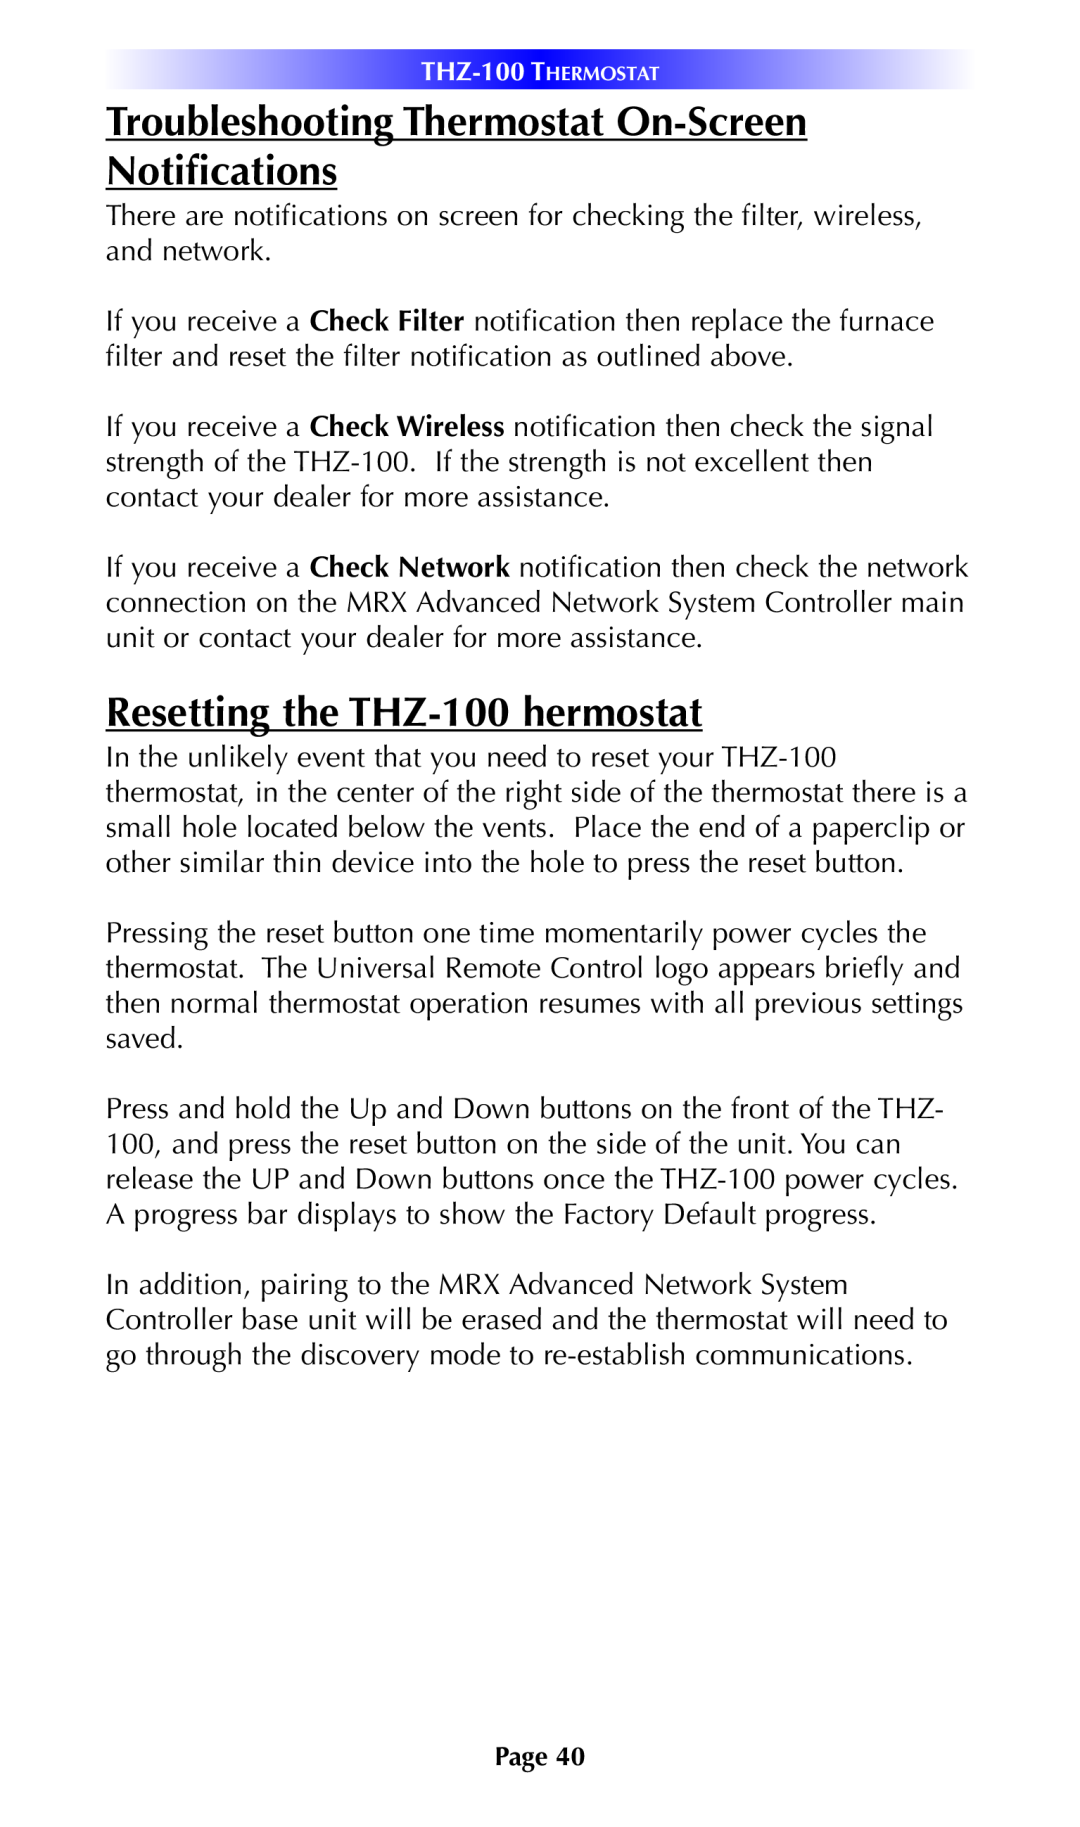 Universal Remote Control owner manual Troubleshooting Thermostat On-ScreenNotifications, Resetting the THZ-100hermostat 